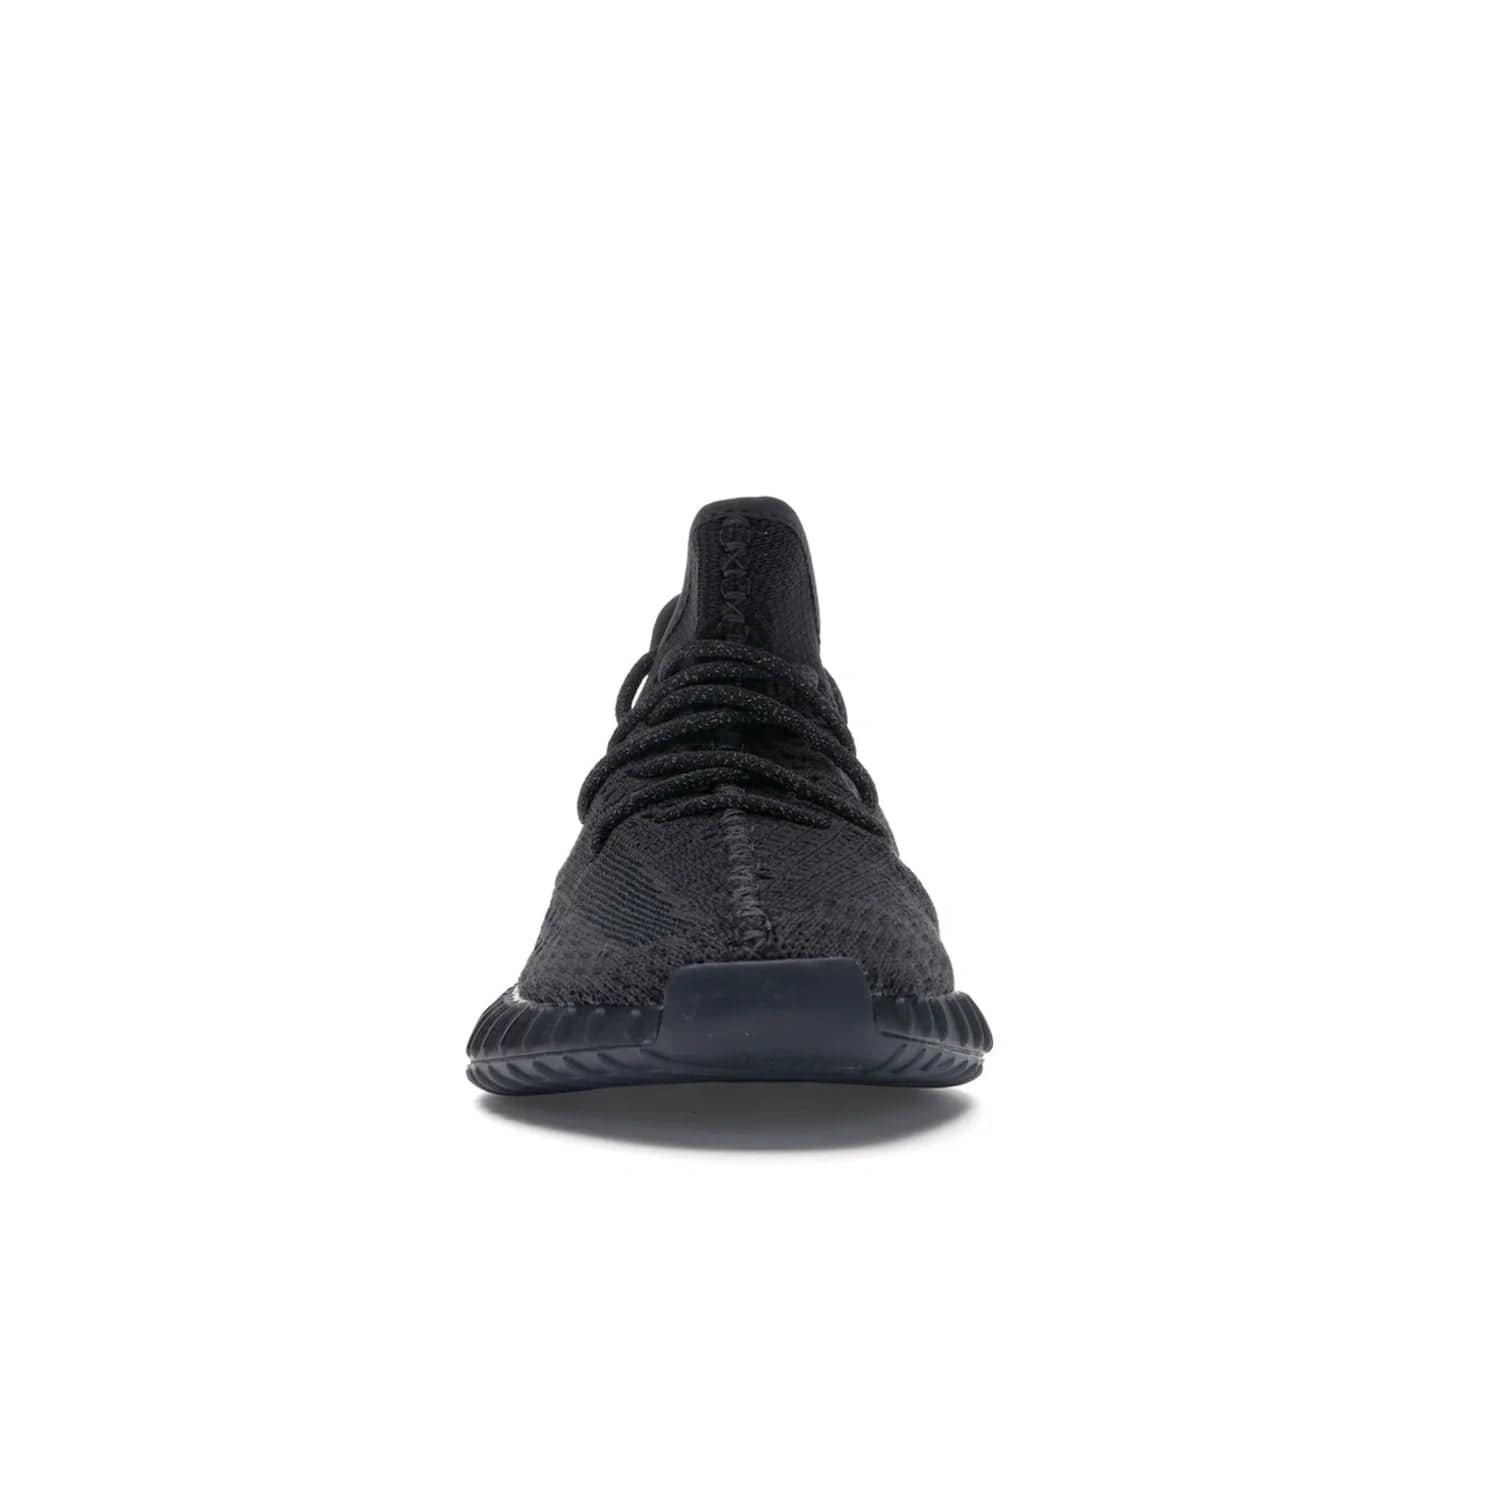 adidas Yeezy Boost 350 V2 Black (Non-Reflective) - Image 10 - Only at www.BallersClubKickz.com - A timeless, sleek silhouette crafted from quality materials. The adidas Yeezy Boost 350 V2 Black (Non-Reflective) brings style and sophistication. Get yours now!